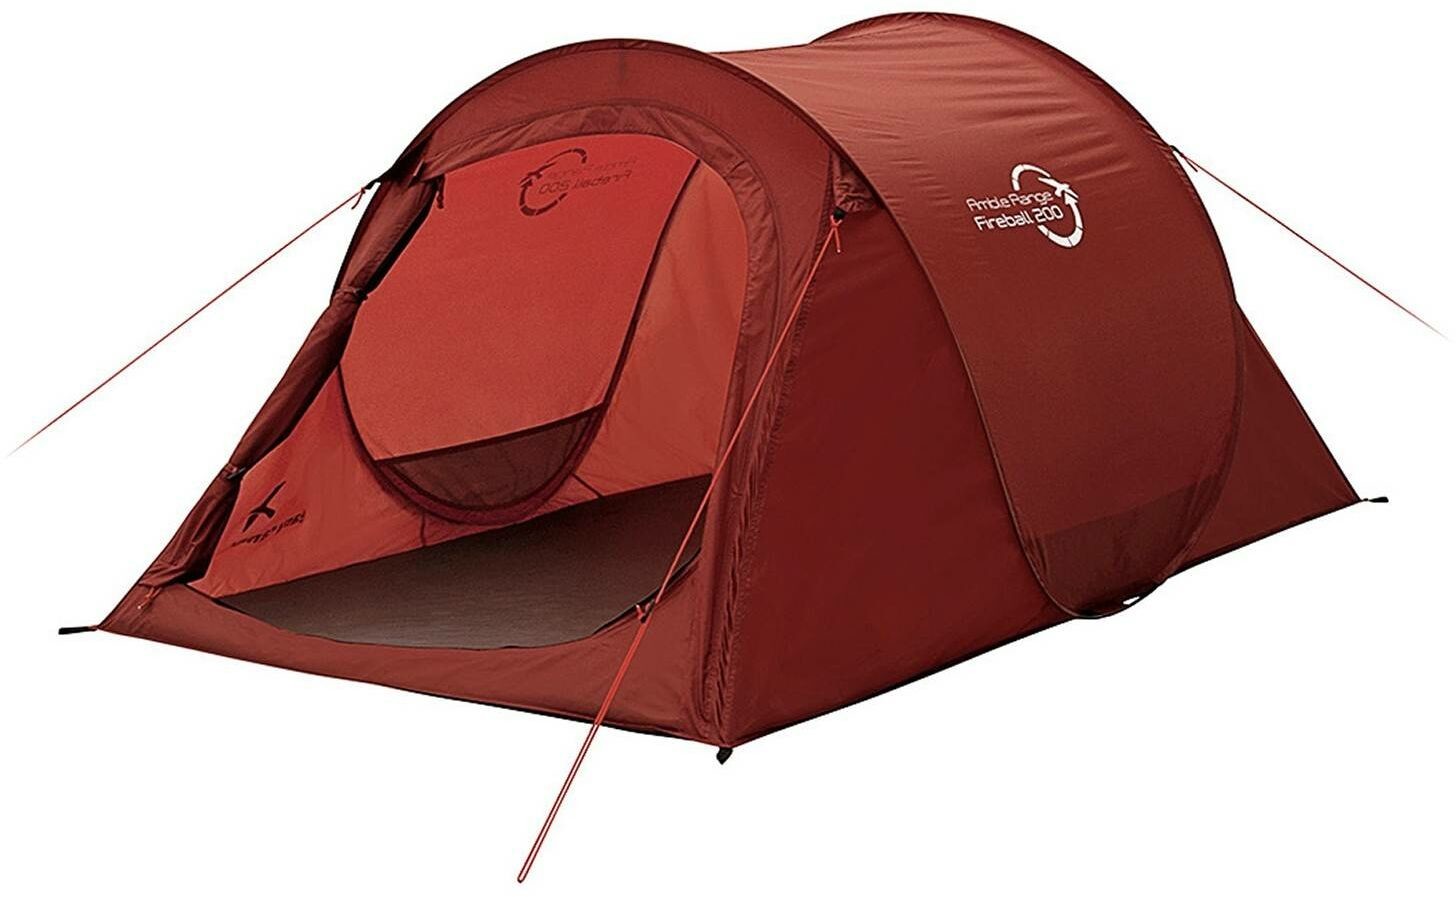 Easy Camp Namiot 2-osobowy Fireball 200 - red 5709388102140